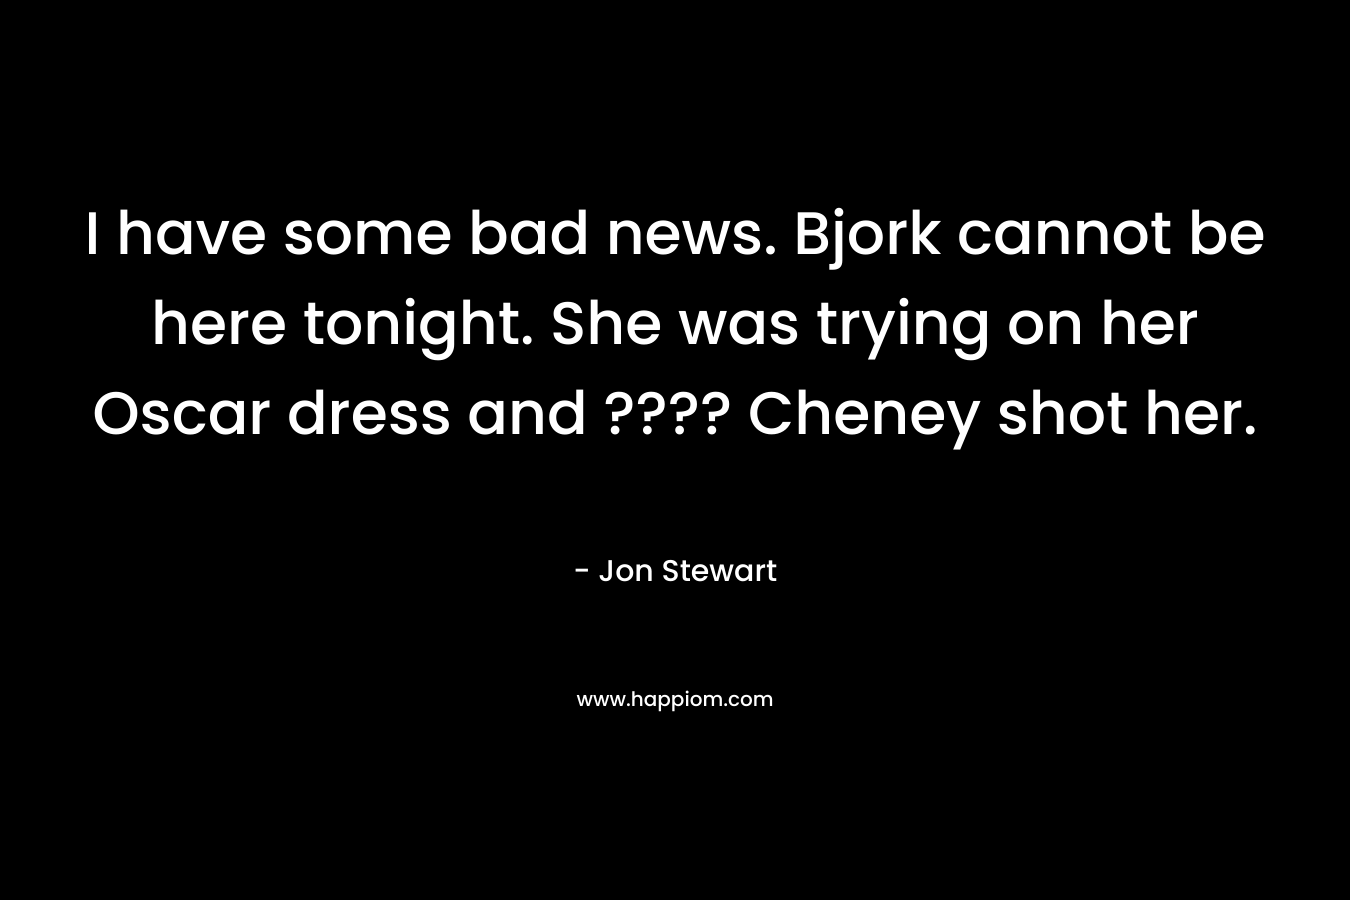 I have some bad news. Bjork cannot be here tonight. She was trying on her Oscar dress and ???? Cheney shot her.